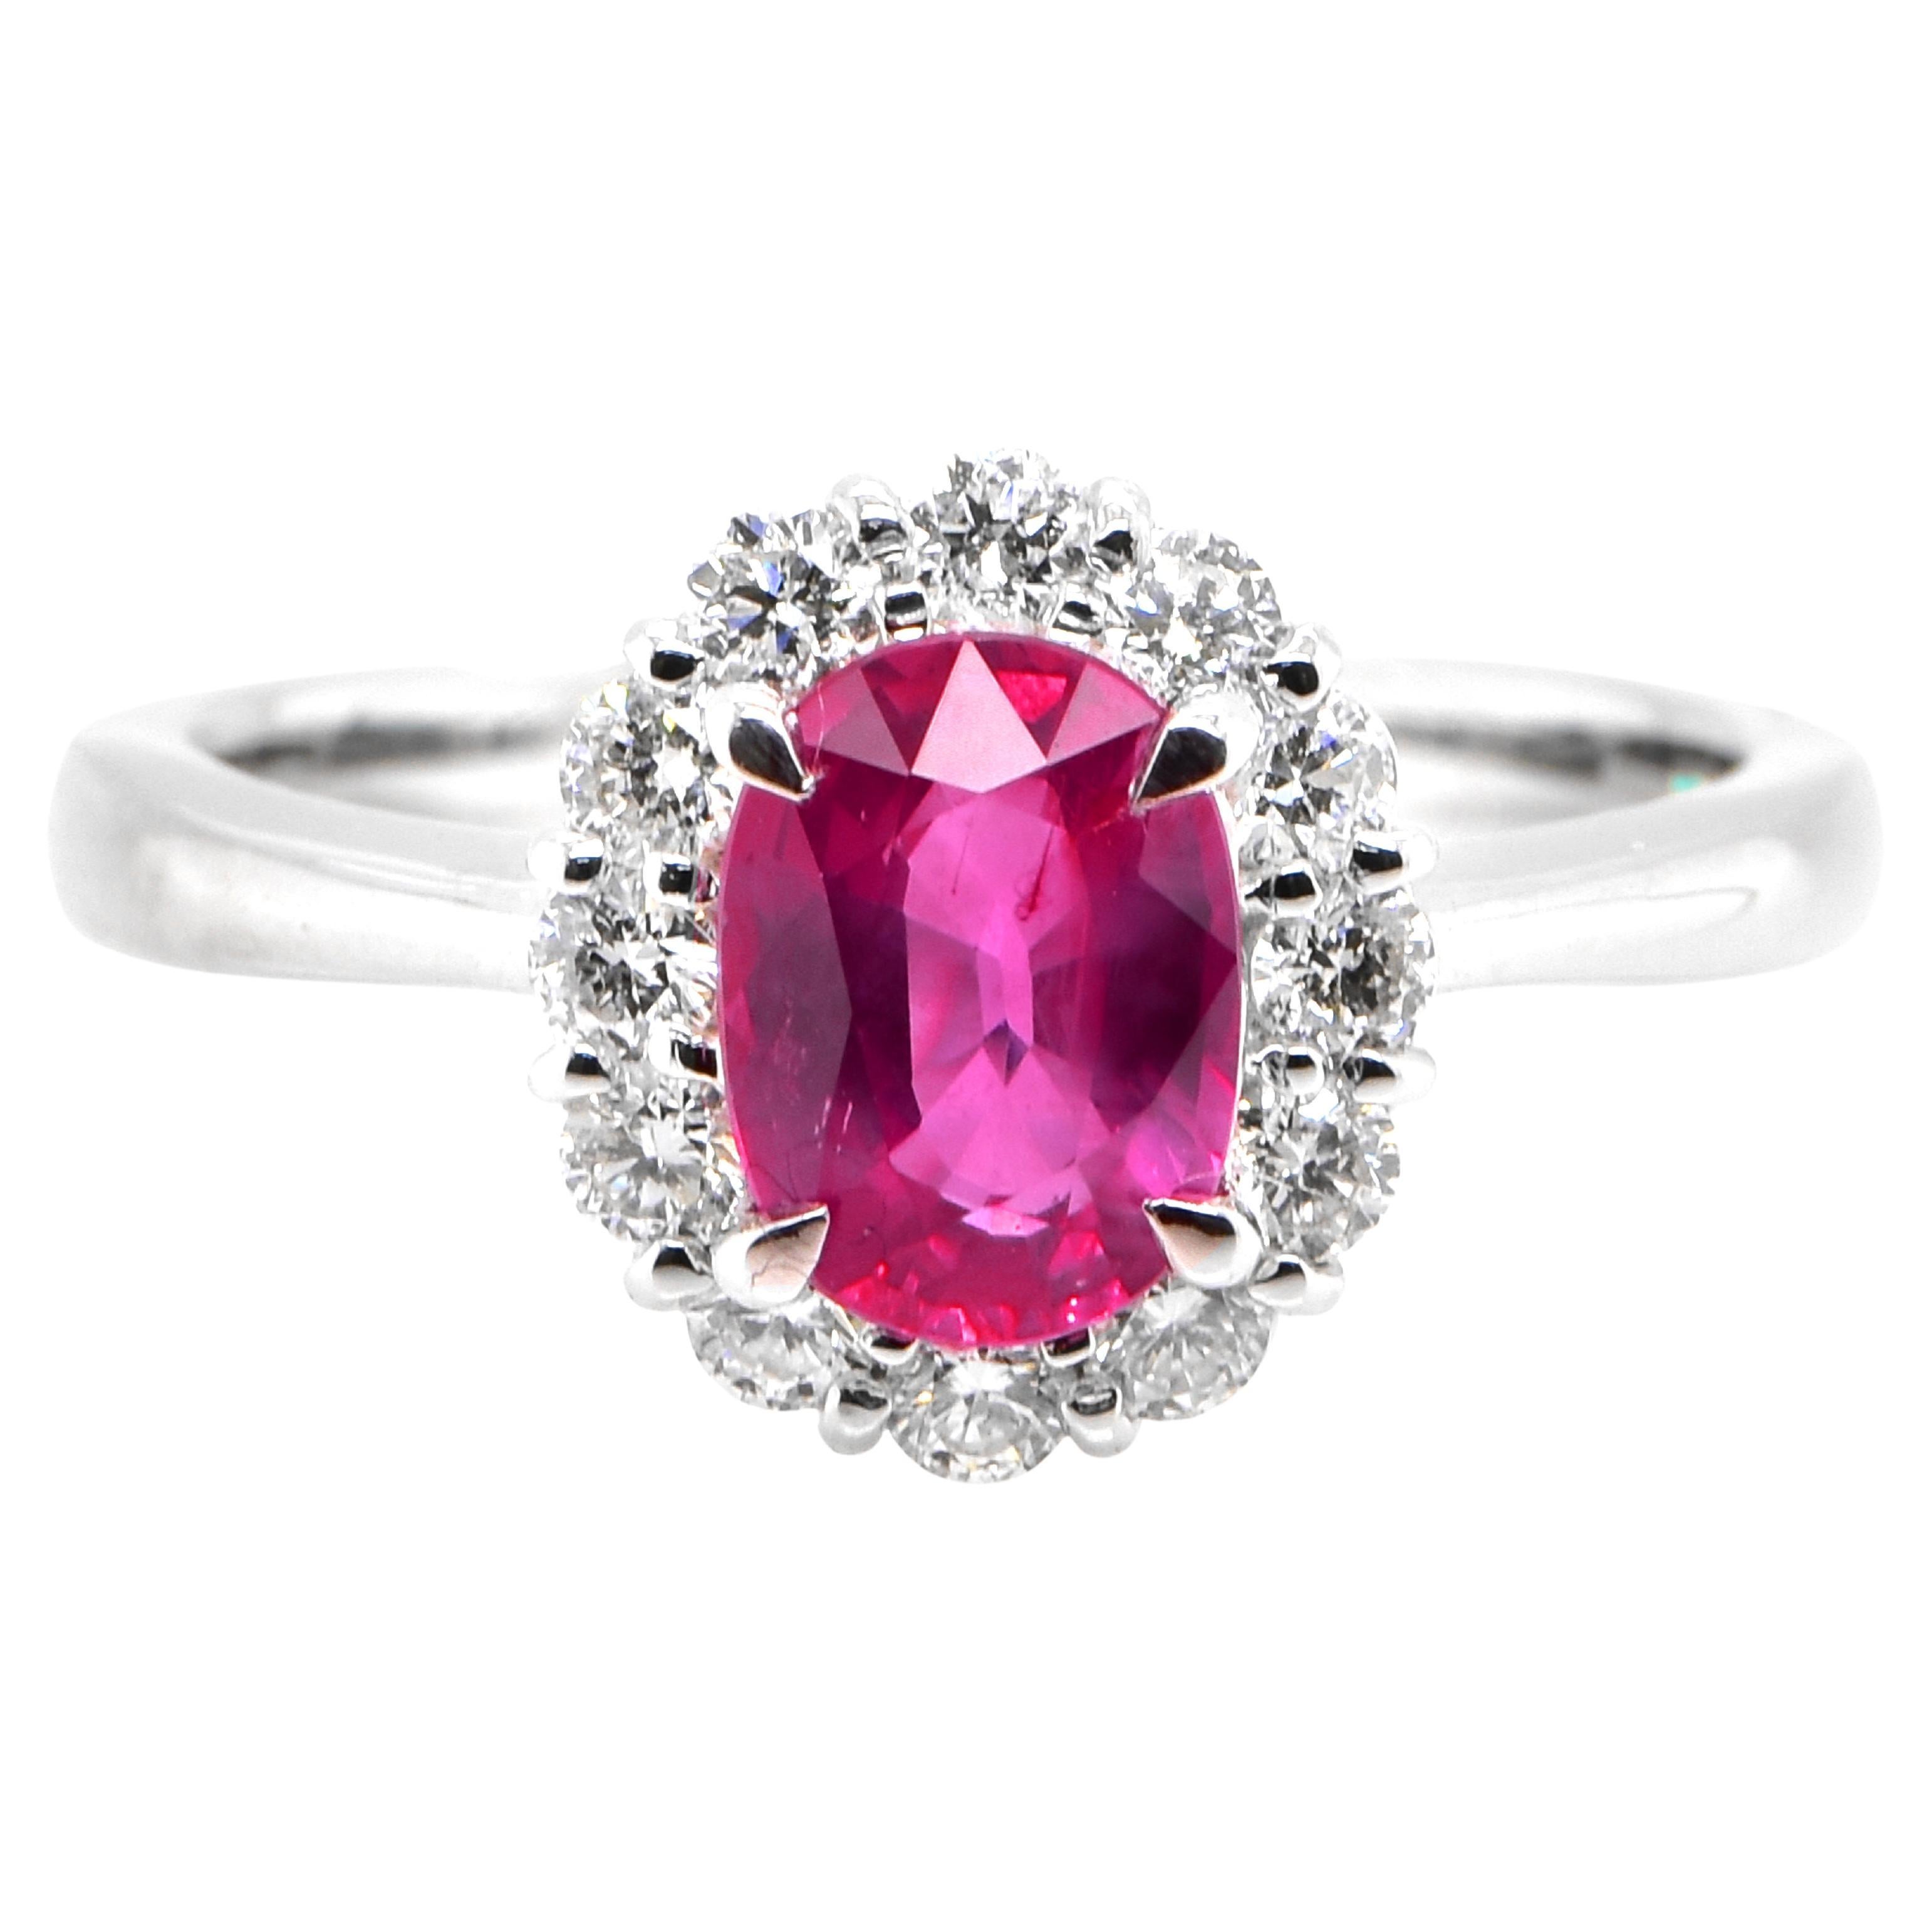 AIGS Certified 1.17 Carat Untreated Ruby and Diamond Ring Made in Platinum For Sale